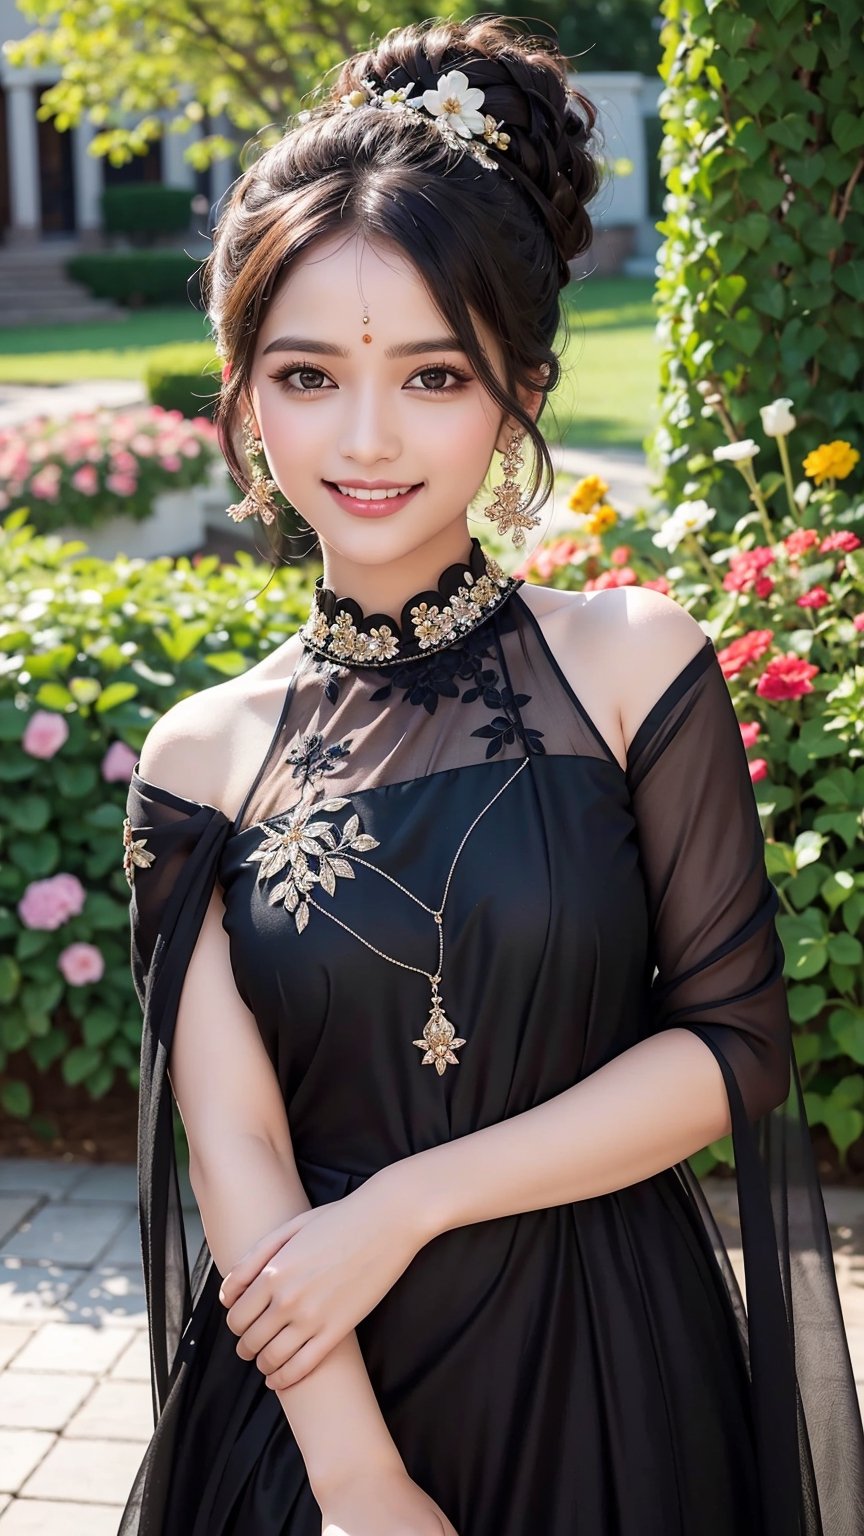 In a flower garden, In black color dress,
Beautiful dress,
Tamil, Hindu, Traditional, Smile, 
Only one person, Outdoor, Detailed face, Perfect anatomy, Photorealistic